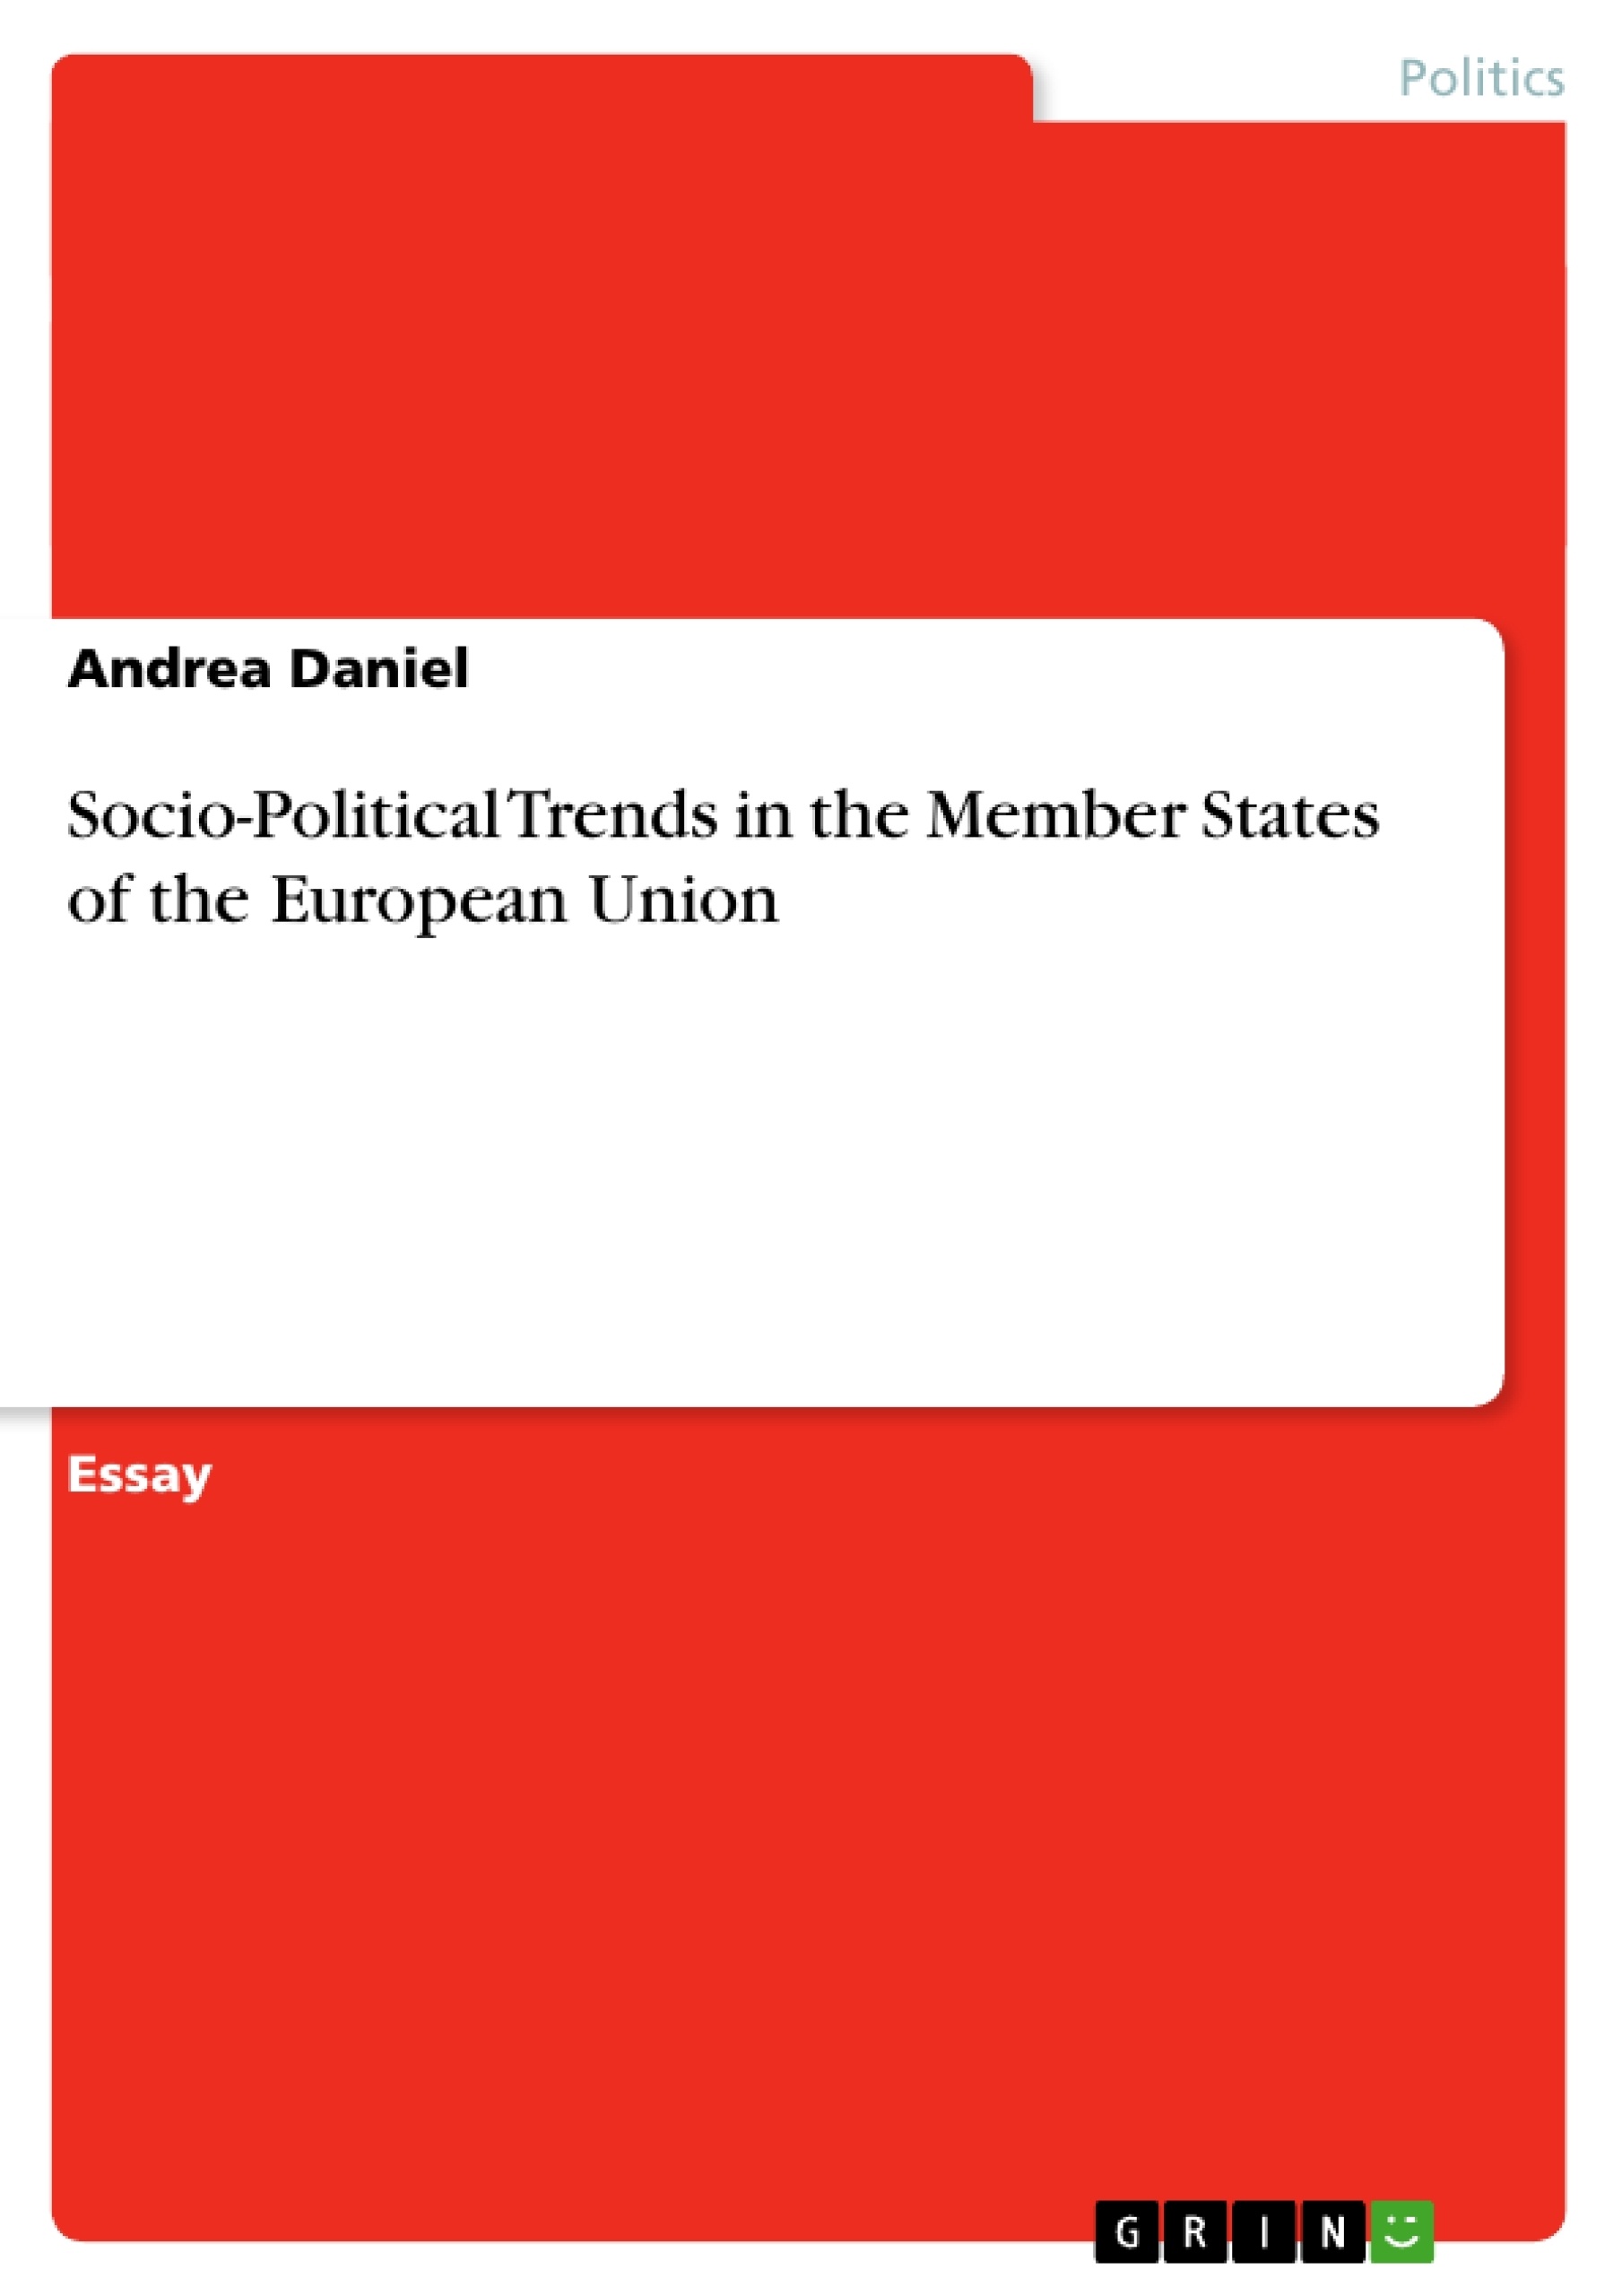 Title: Socio-Political Trends in the Member States of the European Union